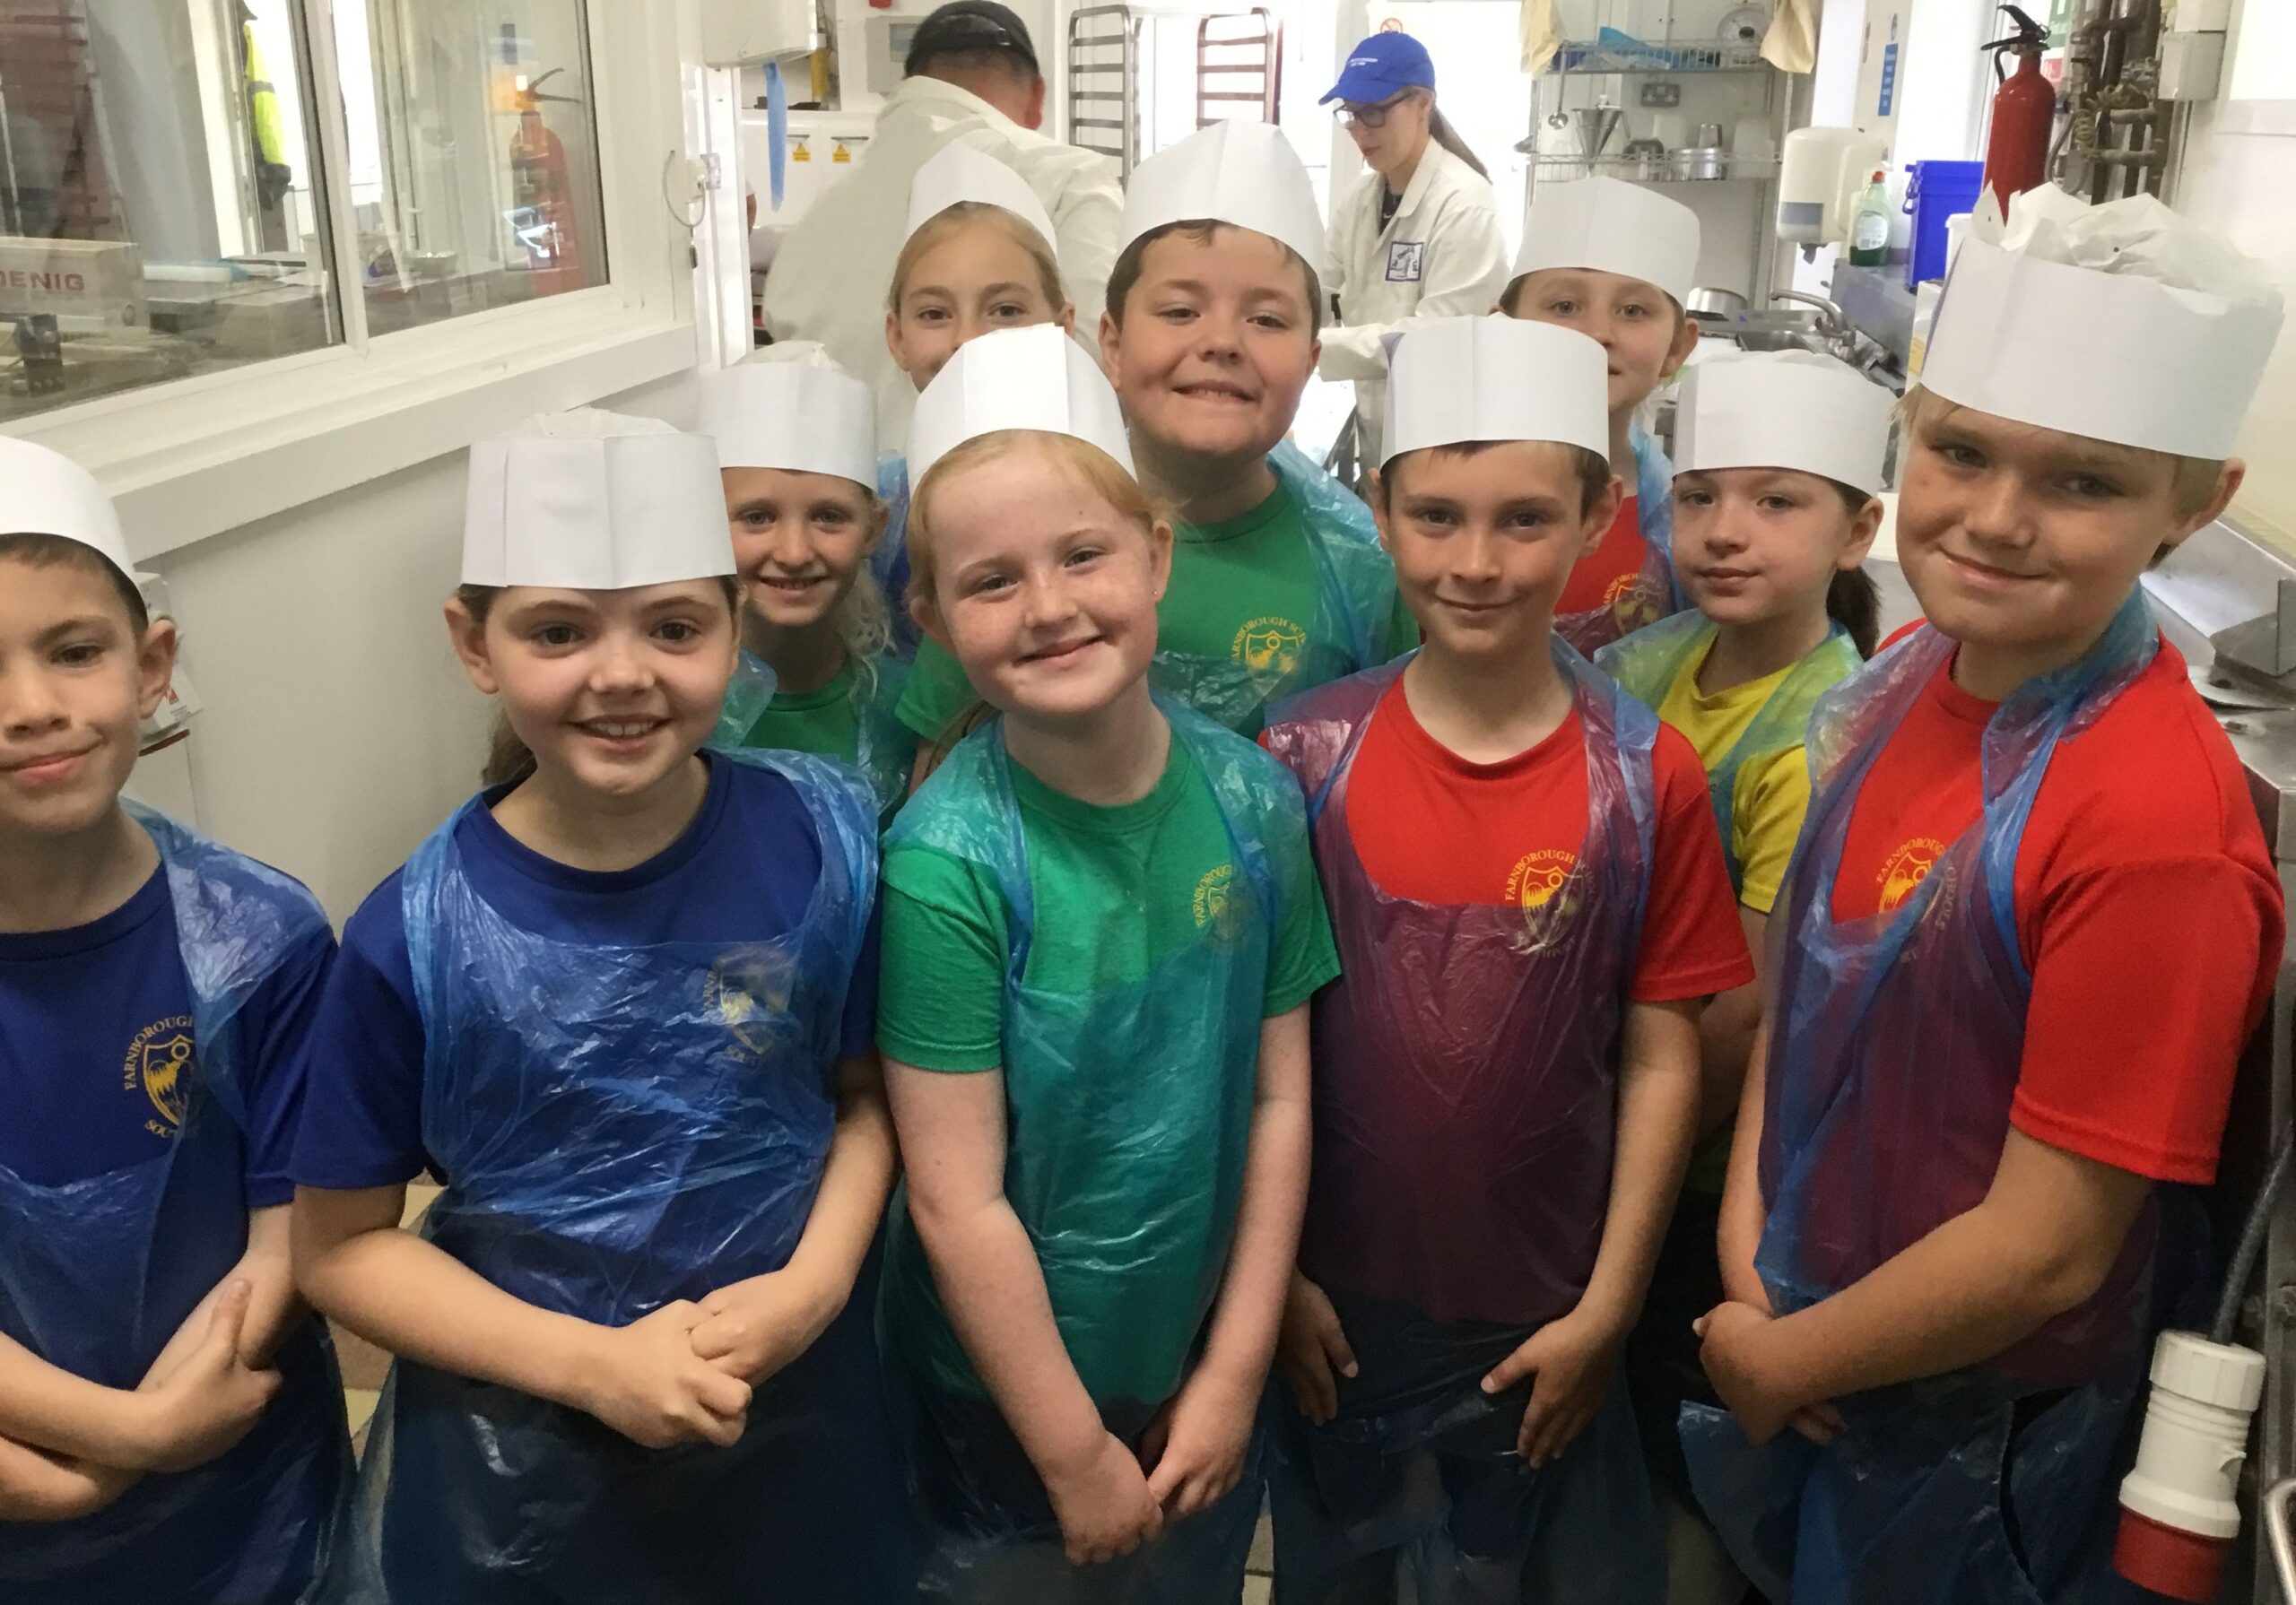 120 children from Farnborough Road Junior school were lucky to become bakers for the morning at The Dutch Bakery in Birkdale